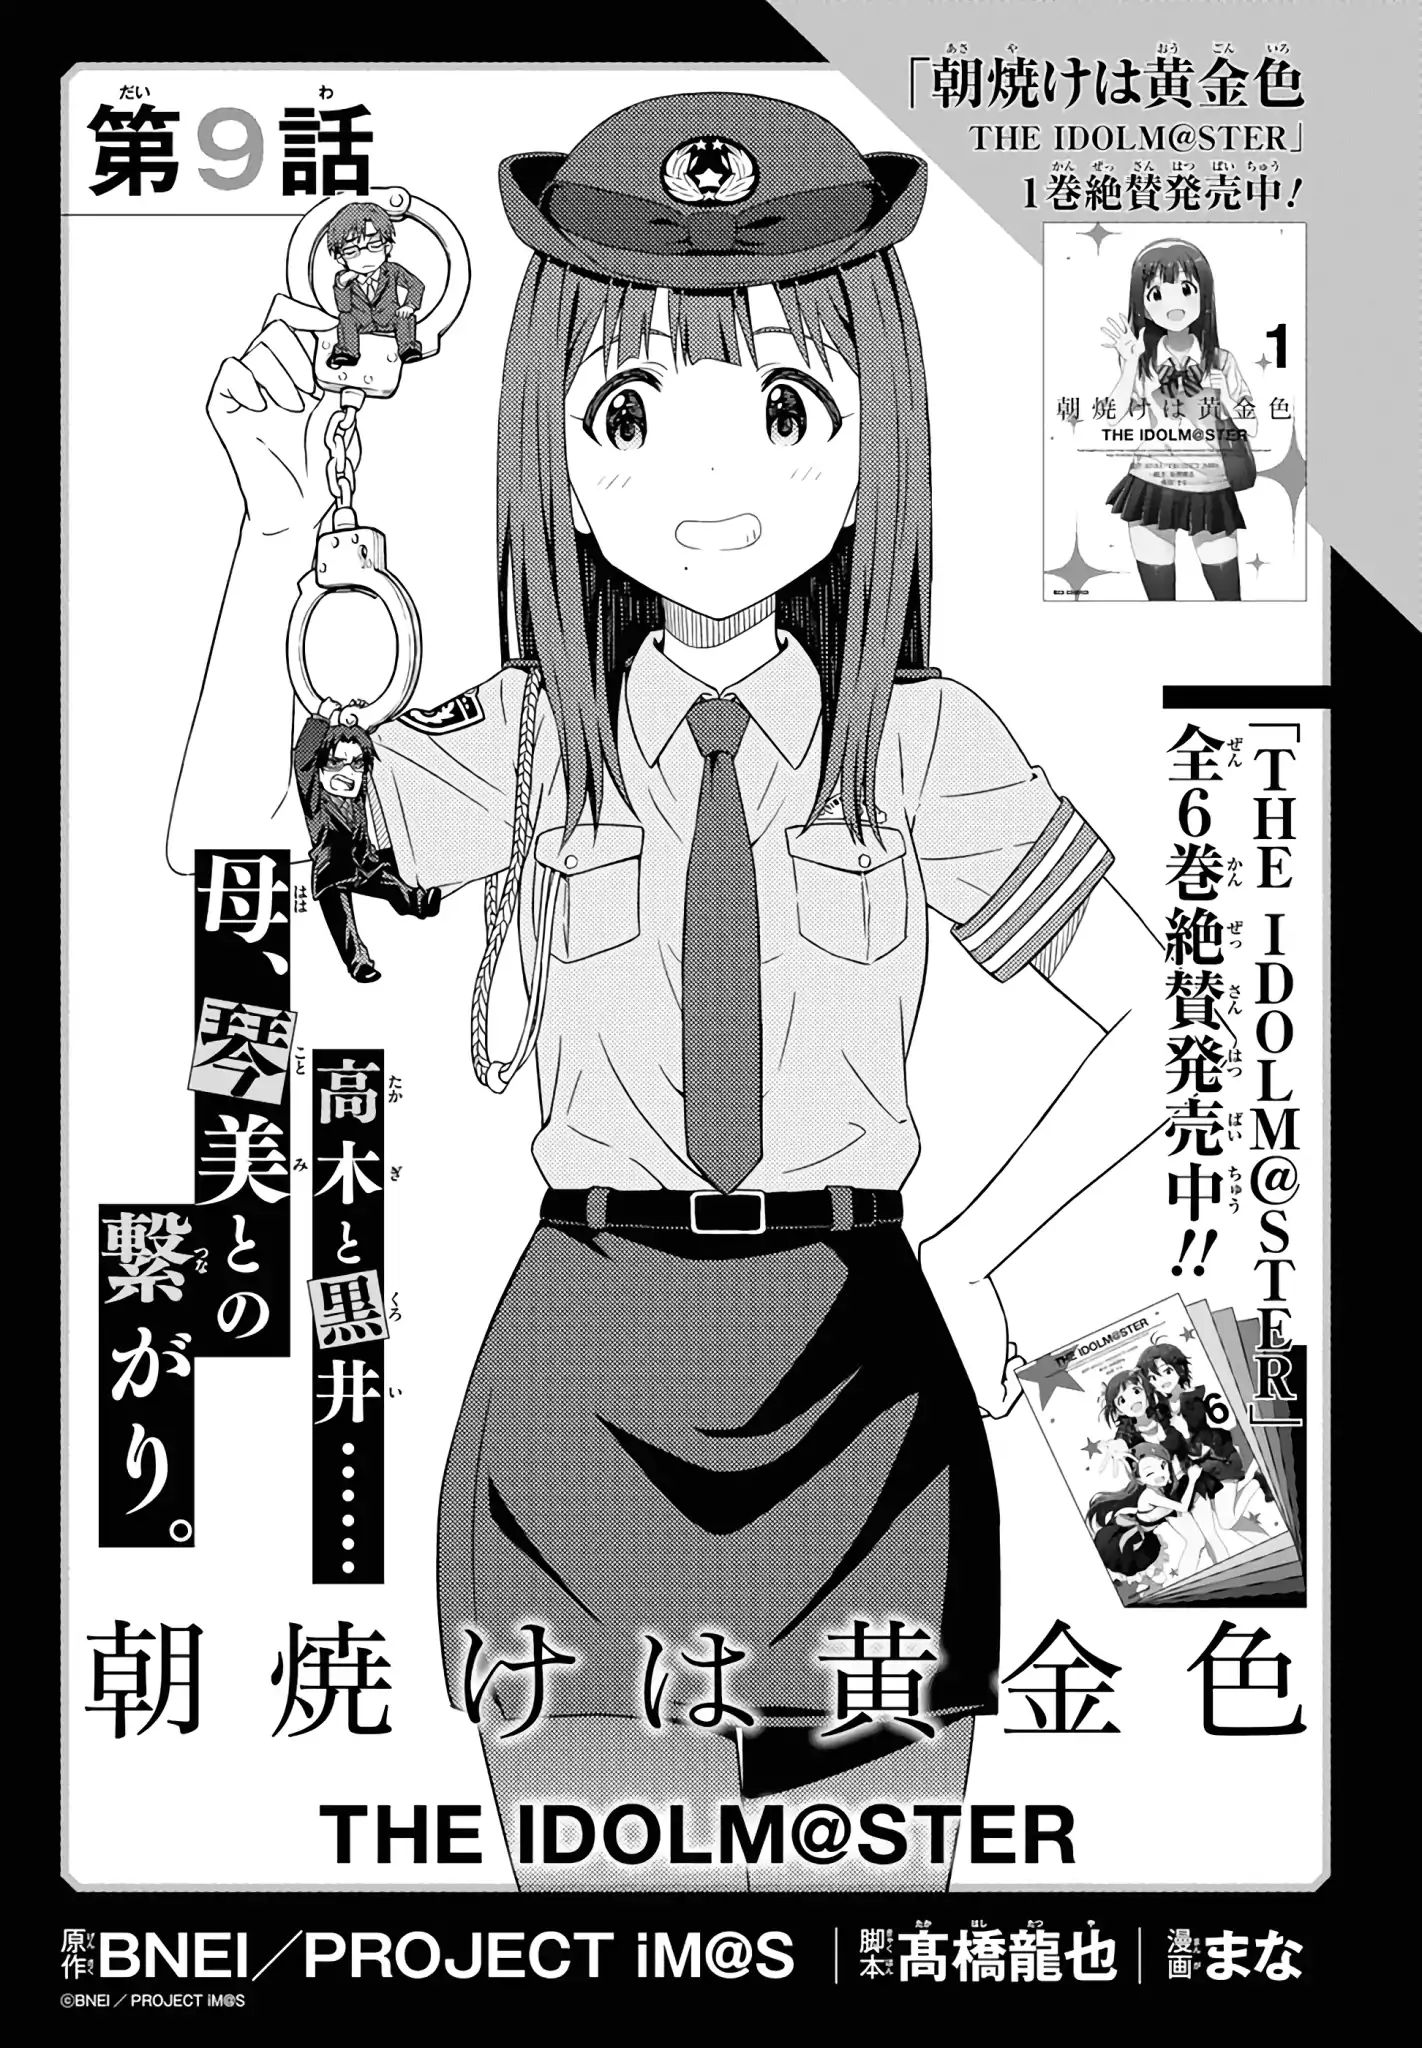 The Idolm@ster: Asayake Wa Koganeiro Vol.1 Chapter 9: Takagi And Kuroi…. The Connection Between Kotomi And Her Mother - Picture 1